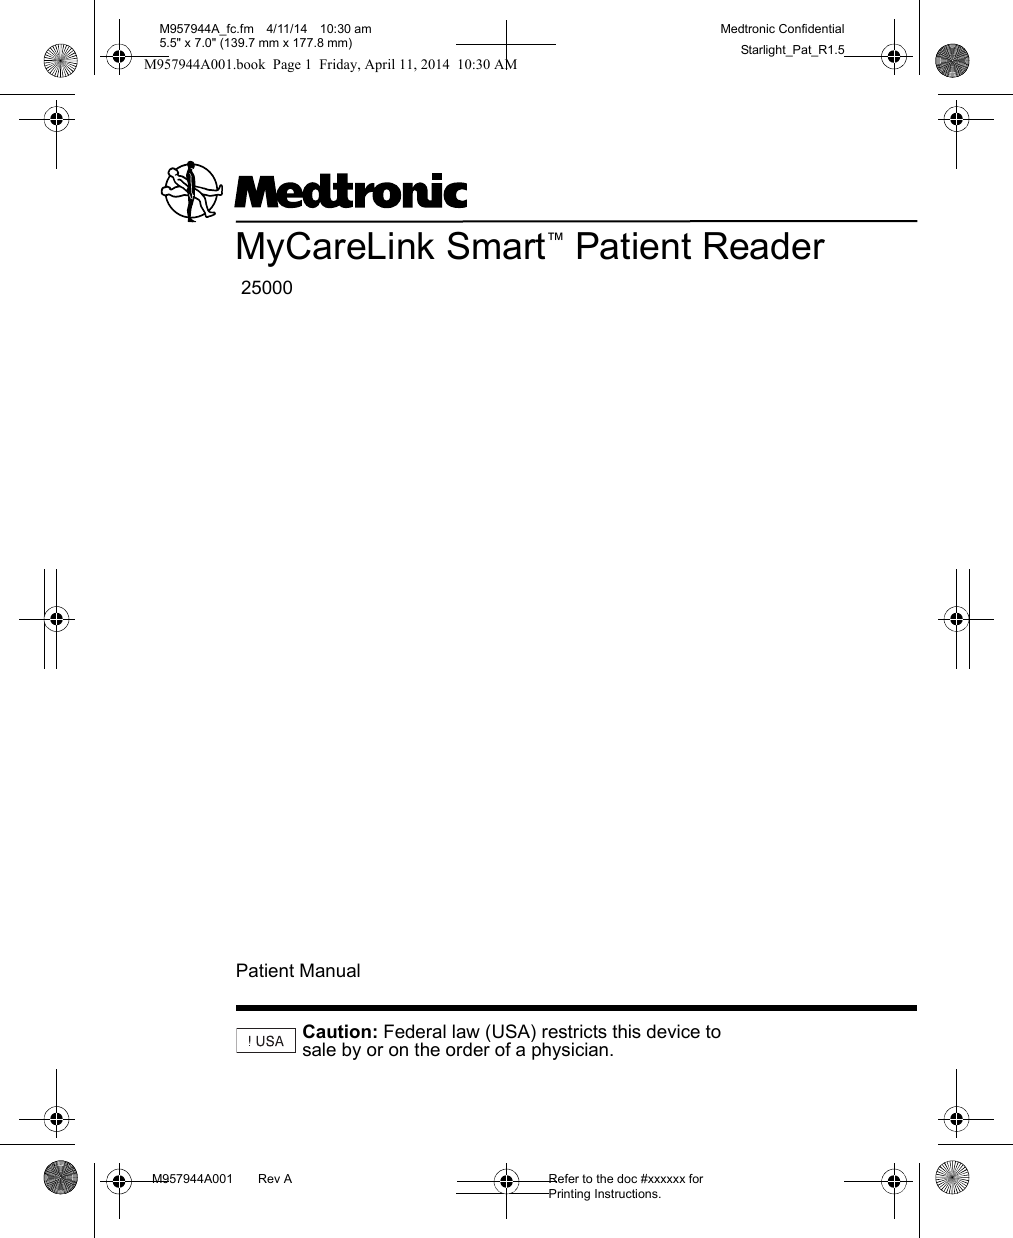 M957944A001 Rev A Refer to the doc #xxxxxx for Printing Instructions.M957944A_fc.fm 4/11/14 10:30 am5.5&quot; x 7.0&quot; (139.7 mm x 177.8 mm)Medtronic ConfidentialStarlight_Pat_R1.5MyCareLink Smart™ Patient Reader 25000Caution: Federal law (USA) restricts this device to sale by or on the order of a physician.Patient ManualM957944A001.book  Page 1  Friday, April 11, 2014  10:30 AM